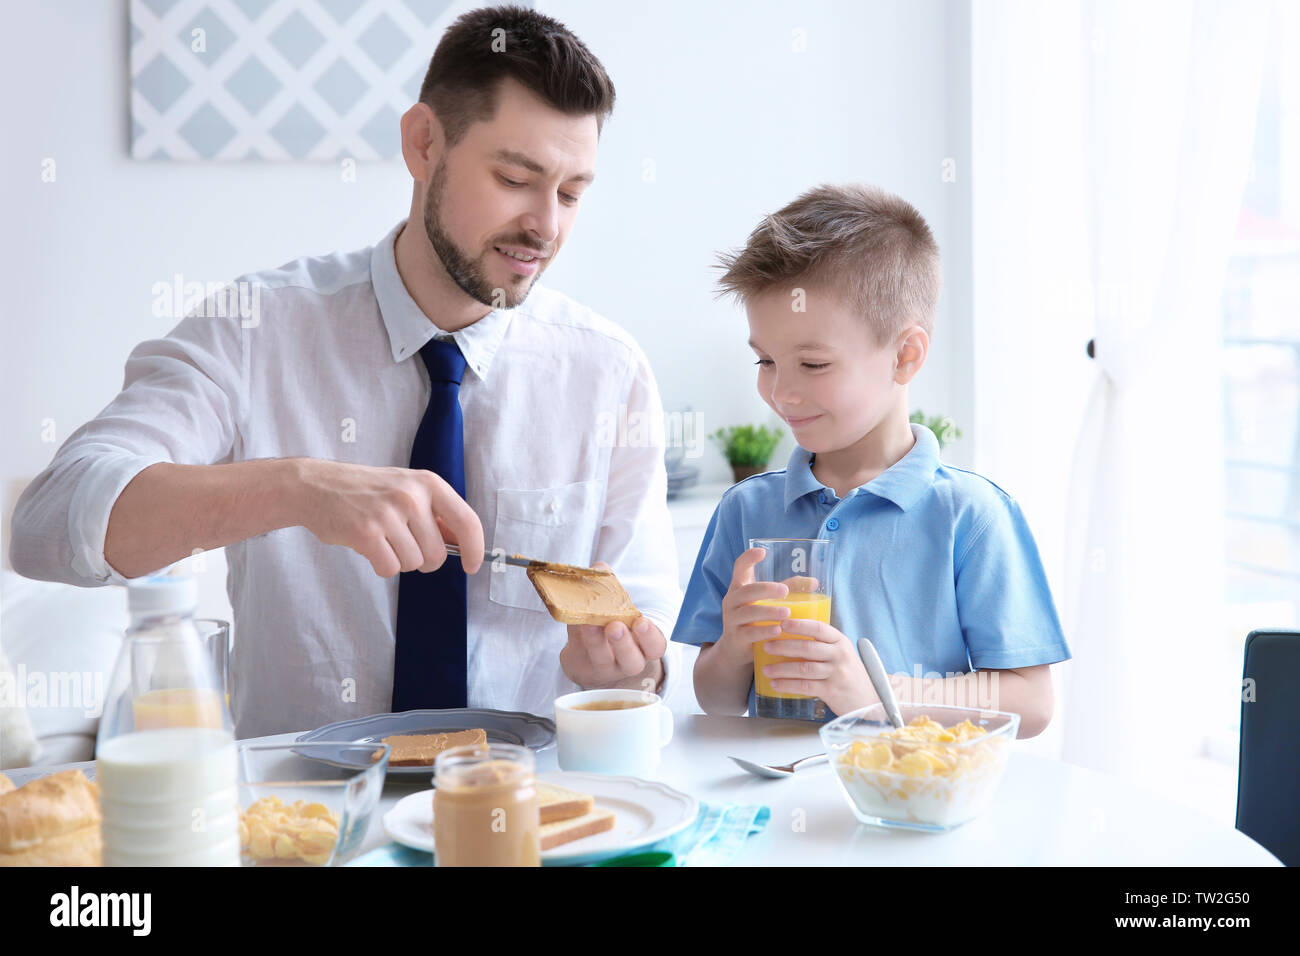 https://c8.alamy.com/comp/TW2G50/dad-and-son-having-lunch-at-home-TW2G50.jpg